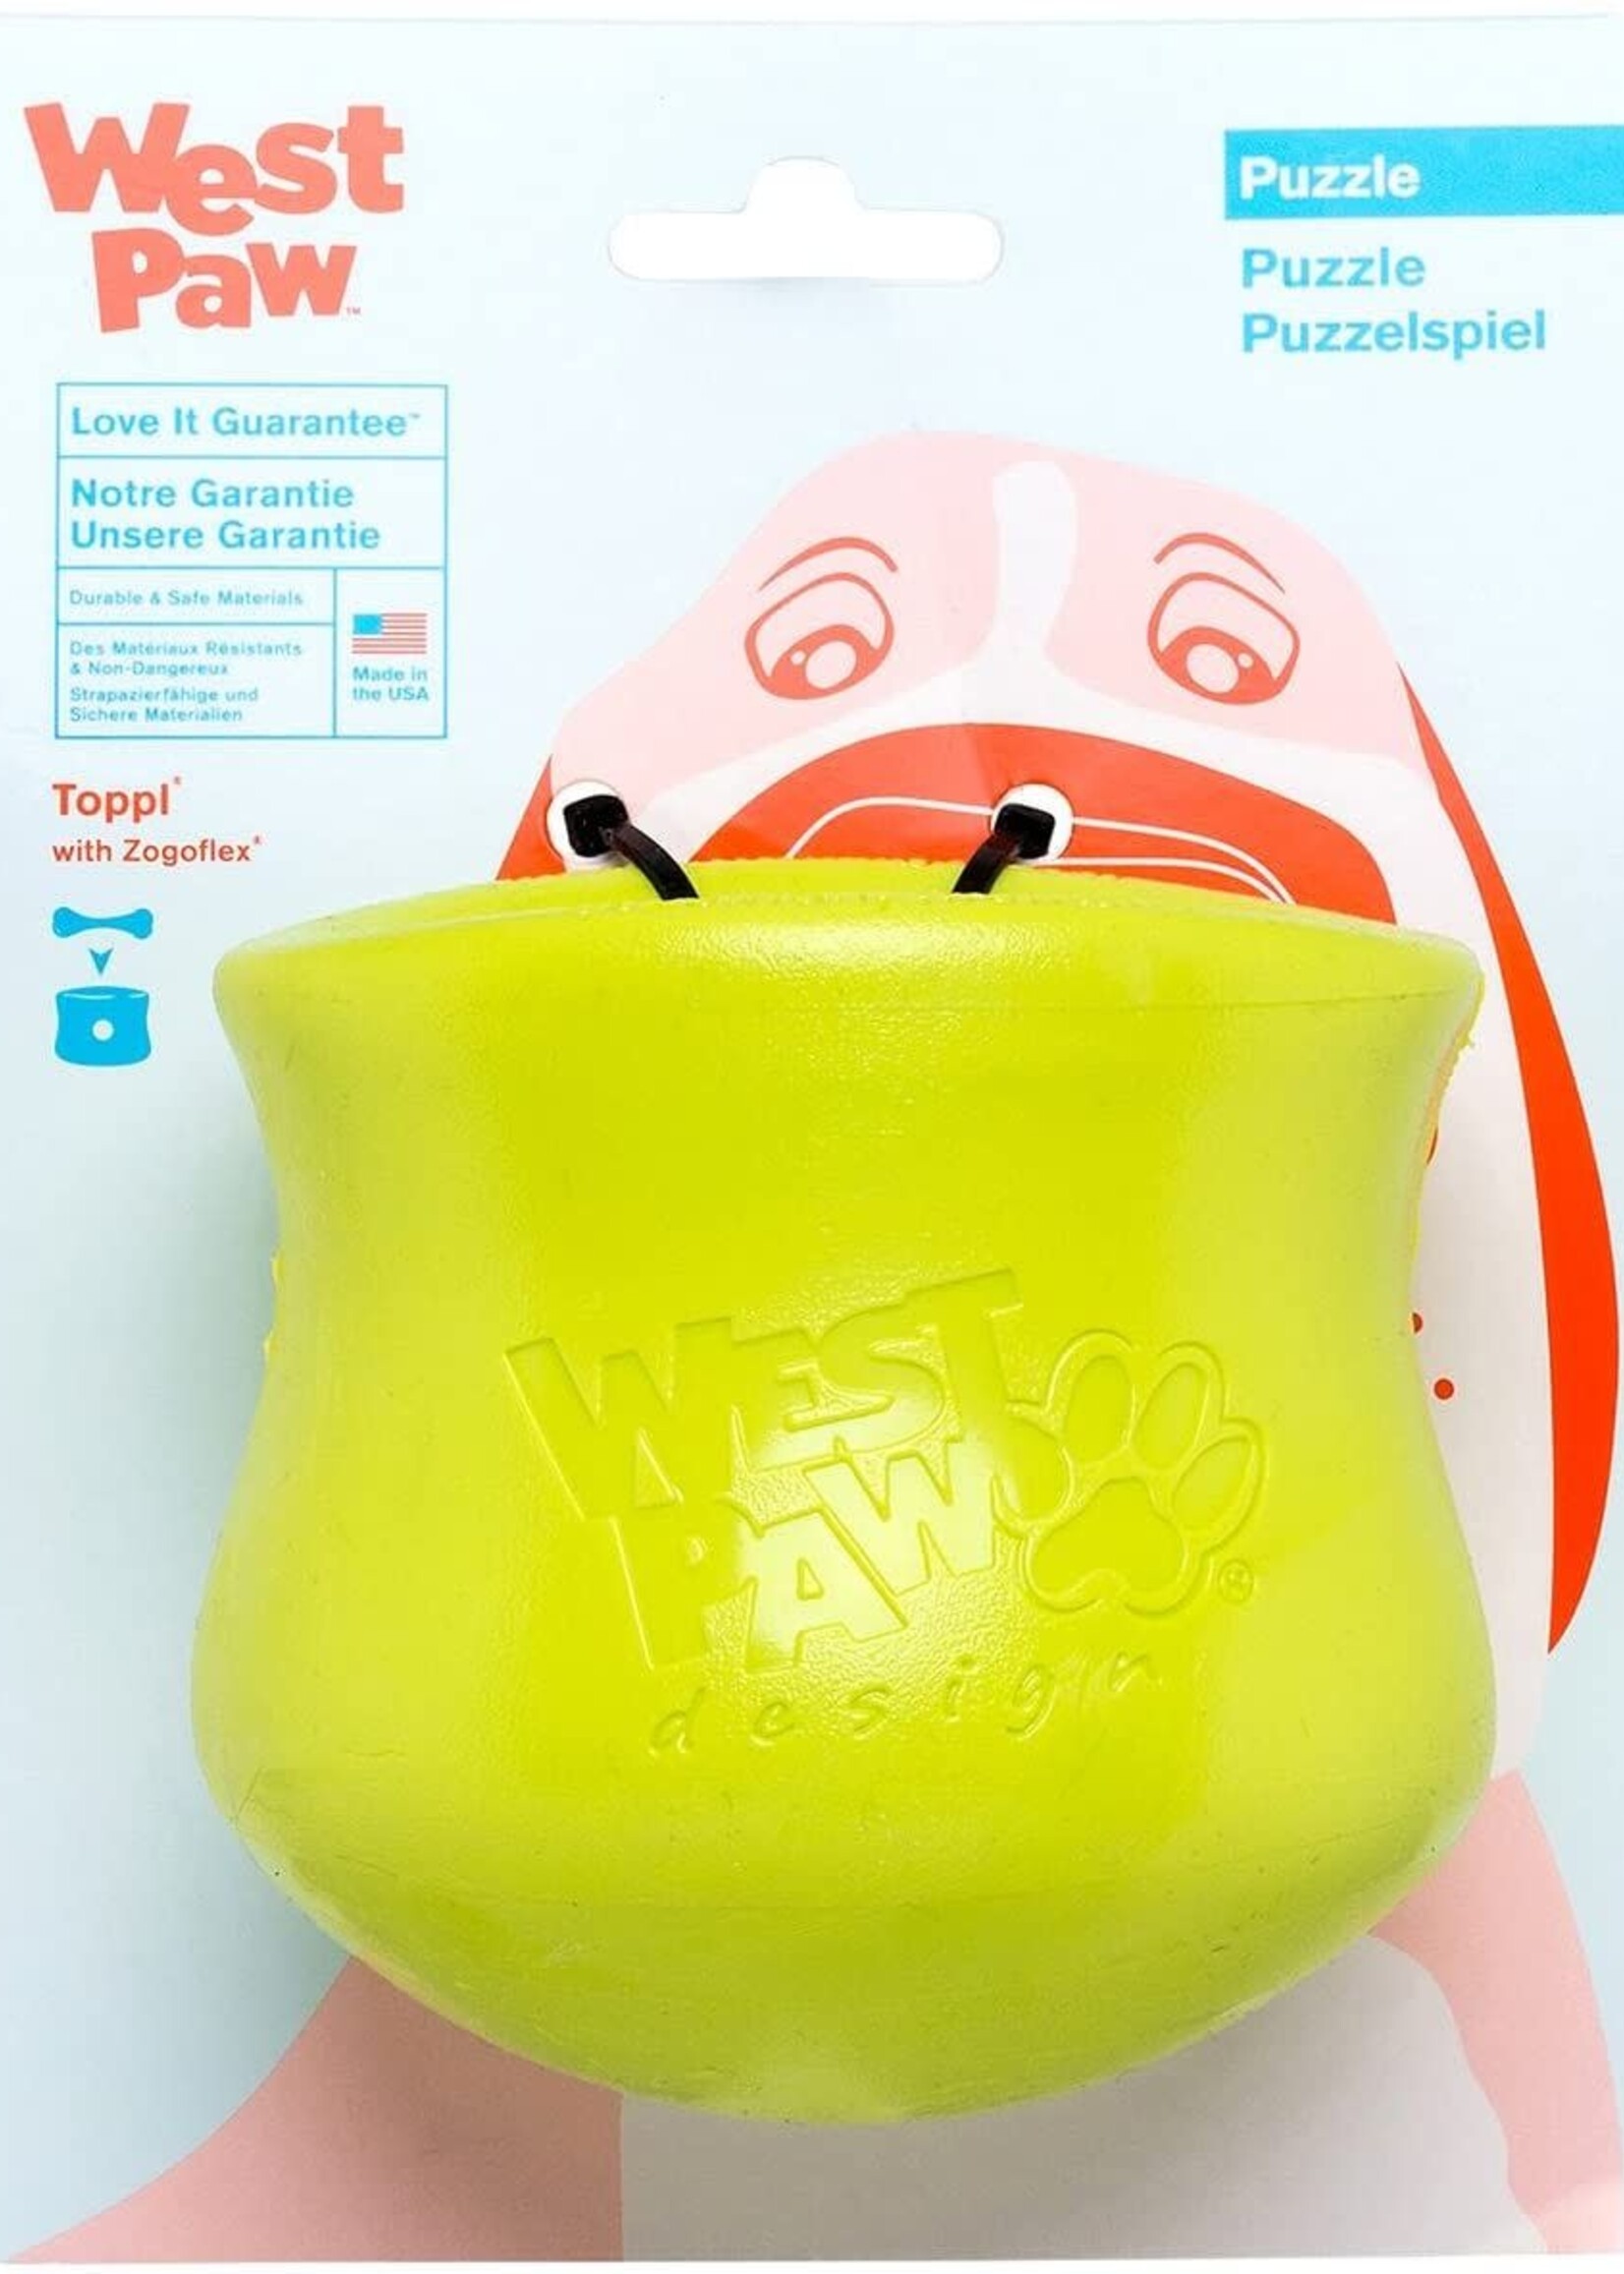 West Paw West Paw Toppl Treat Interactive Dog Toy